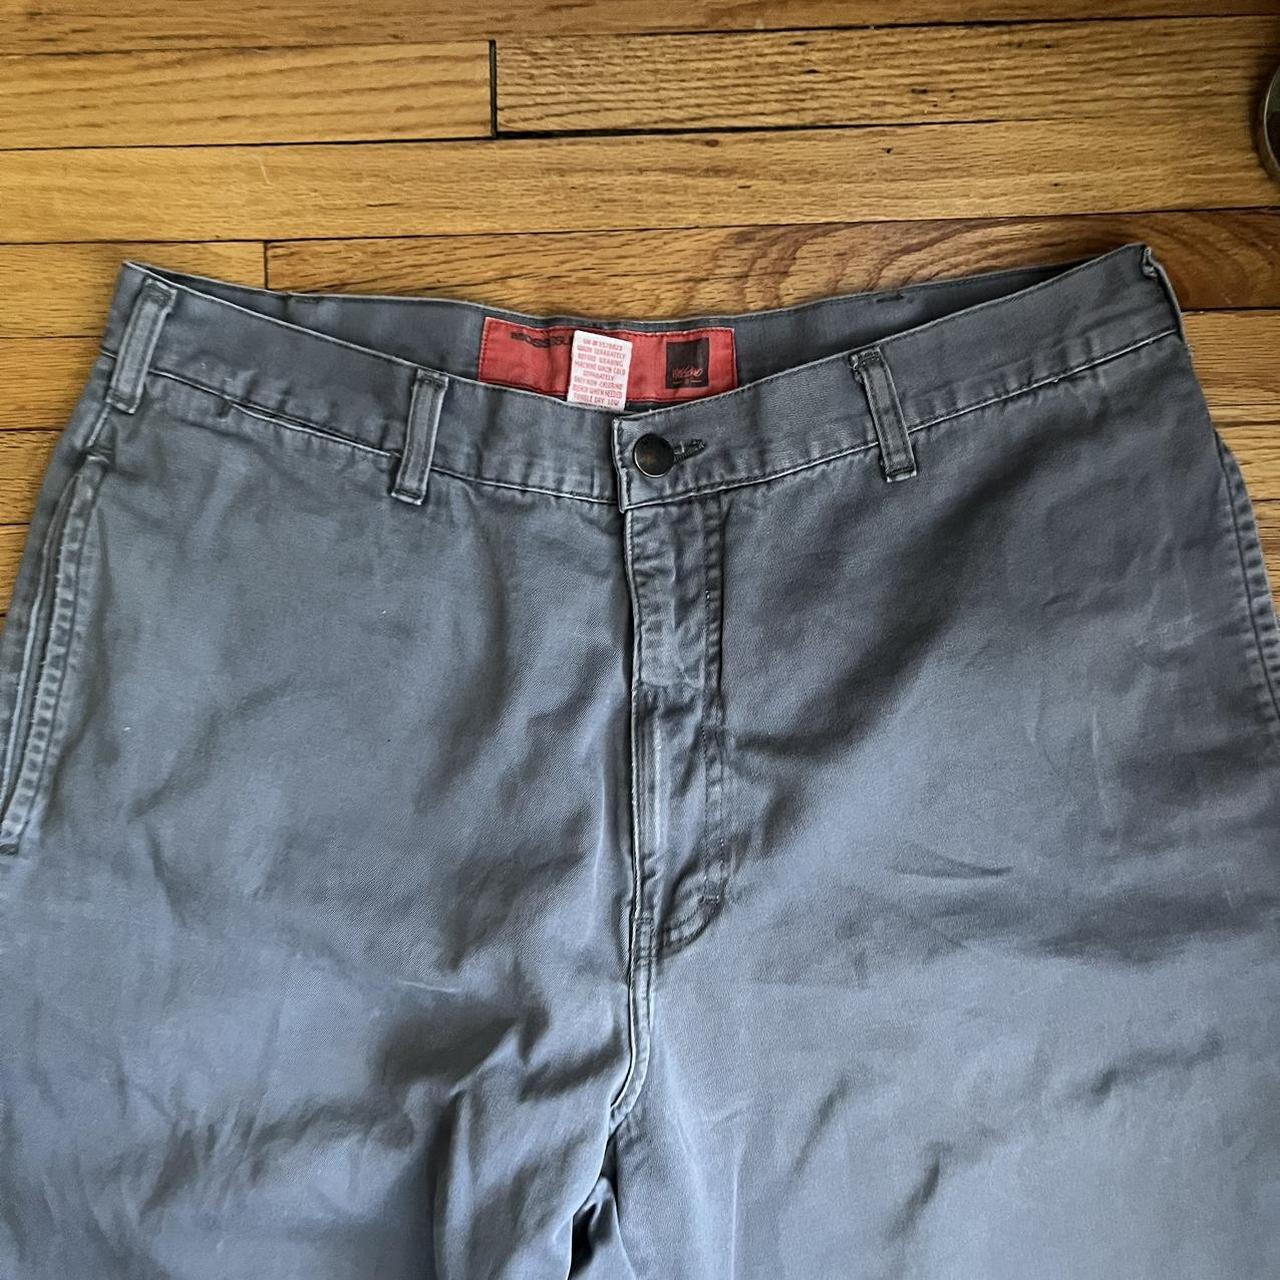 mossimo baggys. Chino type material. Fit like jncos;... - Depop